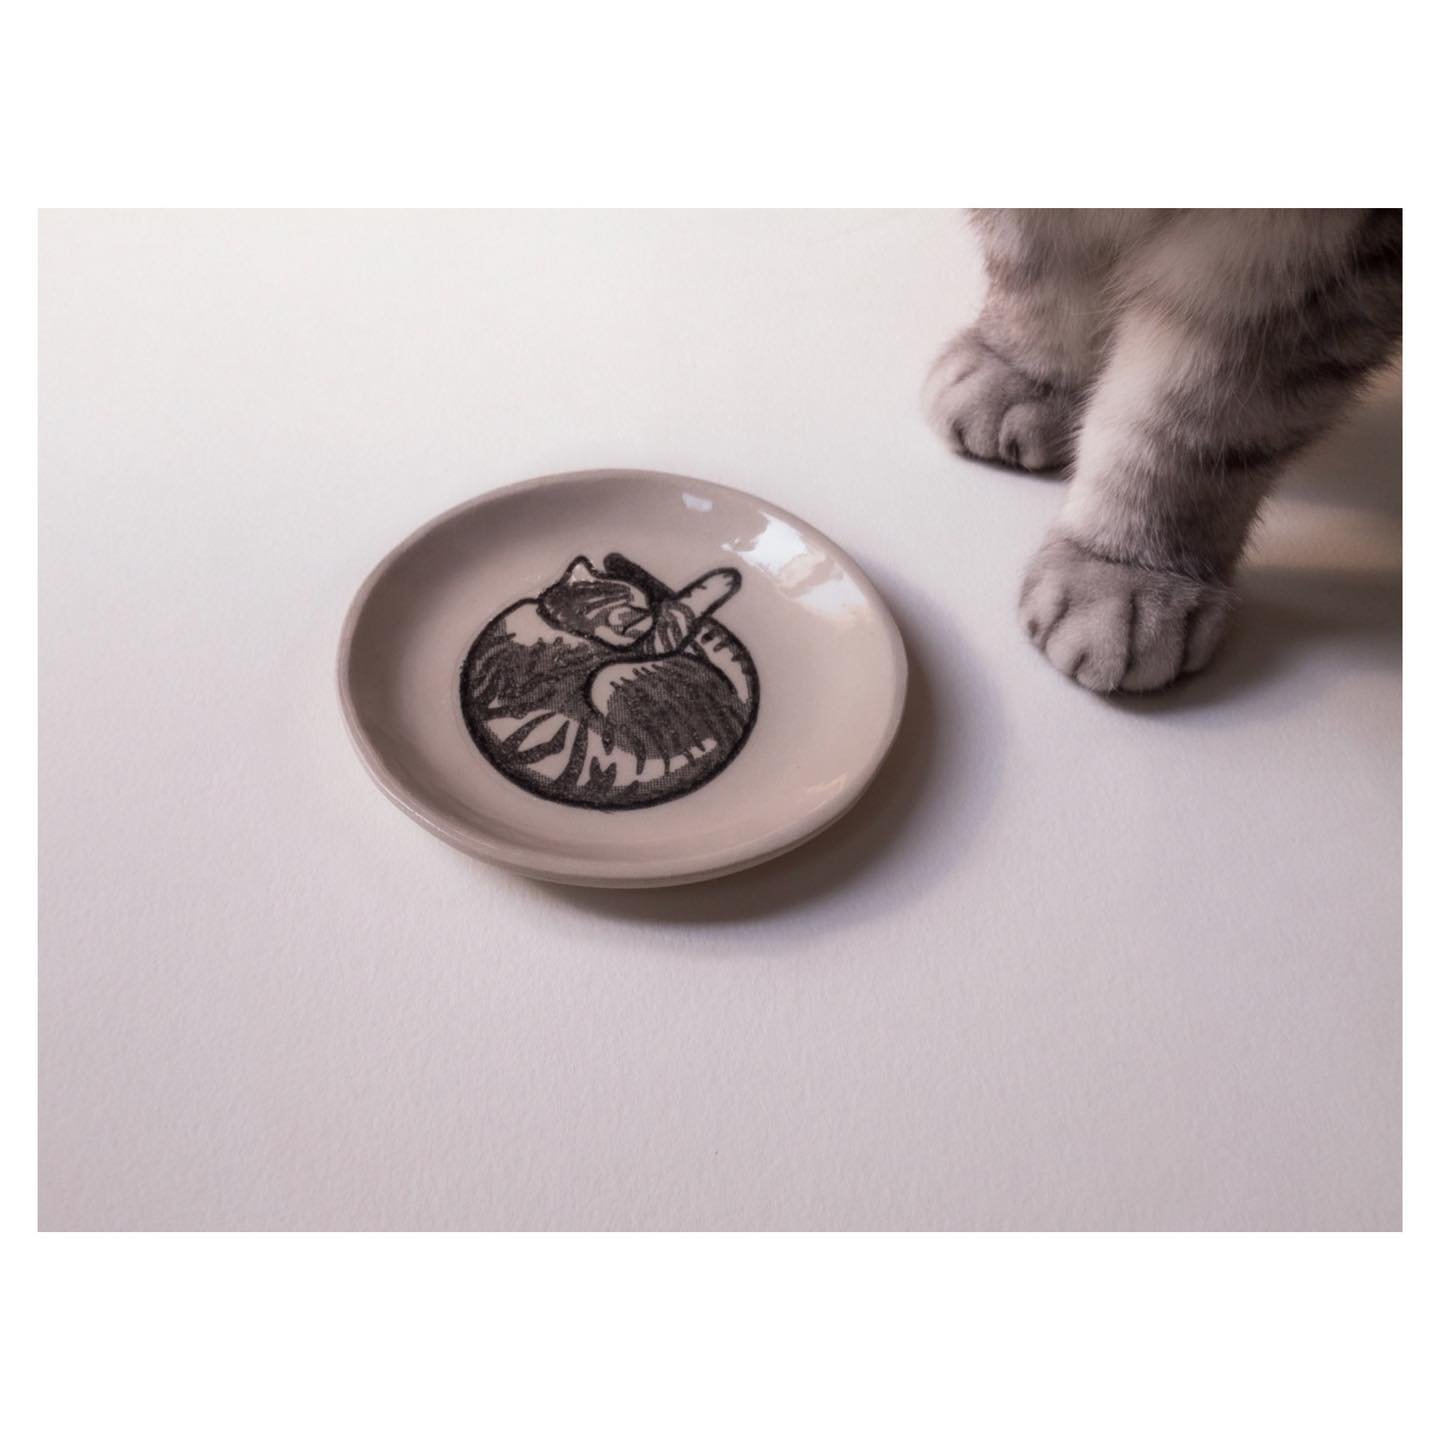 B R I E . M E R C H .

My cat has her own merch now!

A small handmade dish with a ceramic screenprint of my infamous studio assistant Brie the cat. Perfect to serve up Dreamies, use as a salt cellar or keep your house keys from getting lost.

I&rsqu